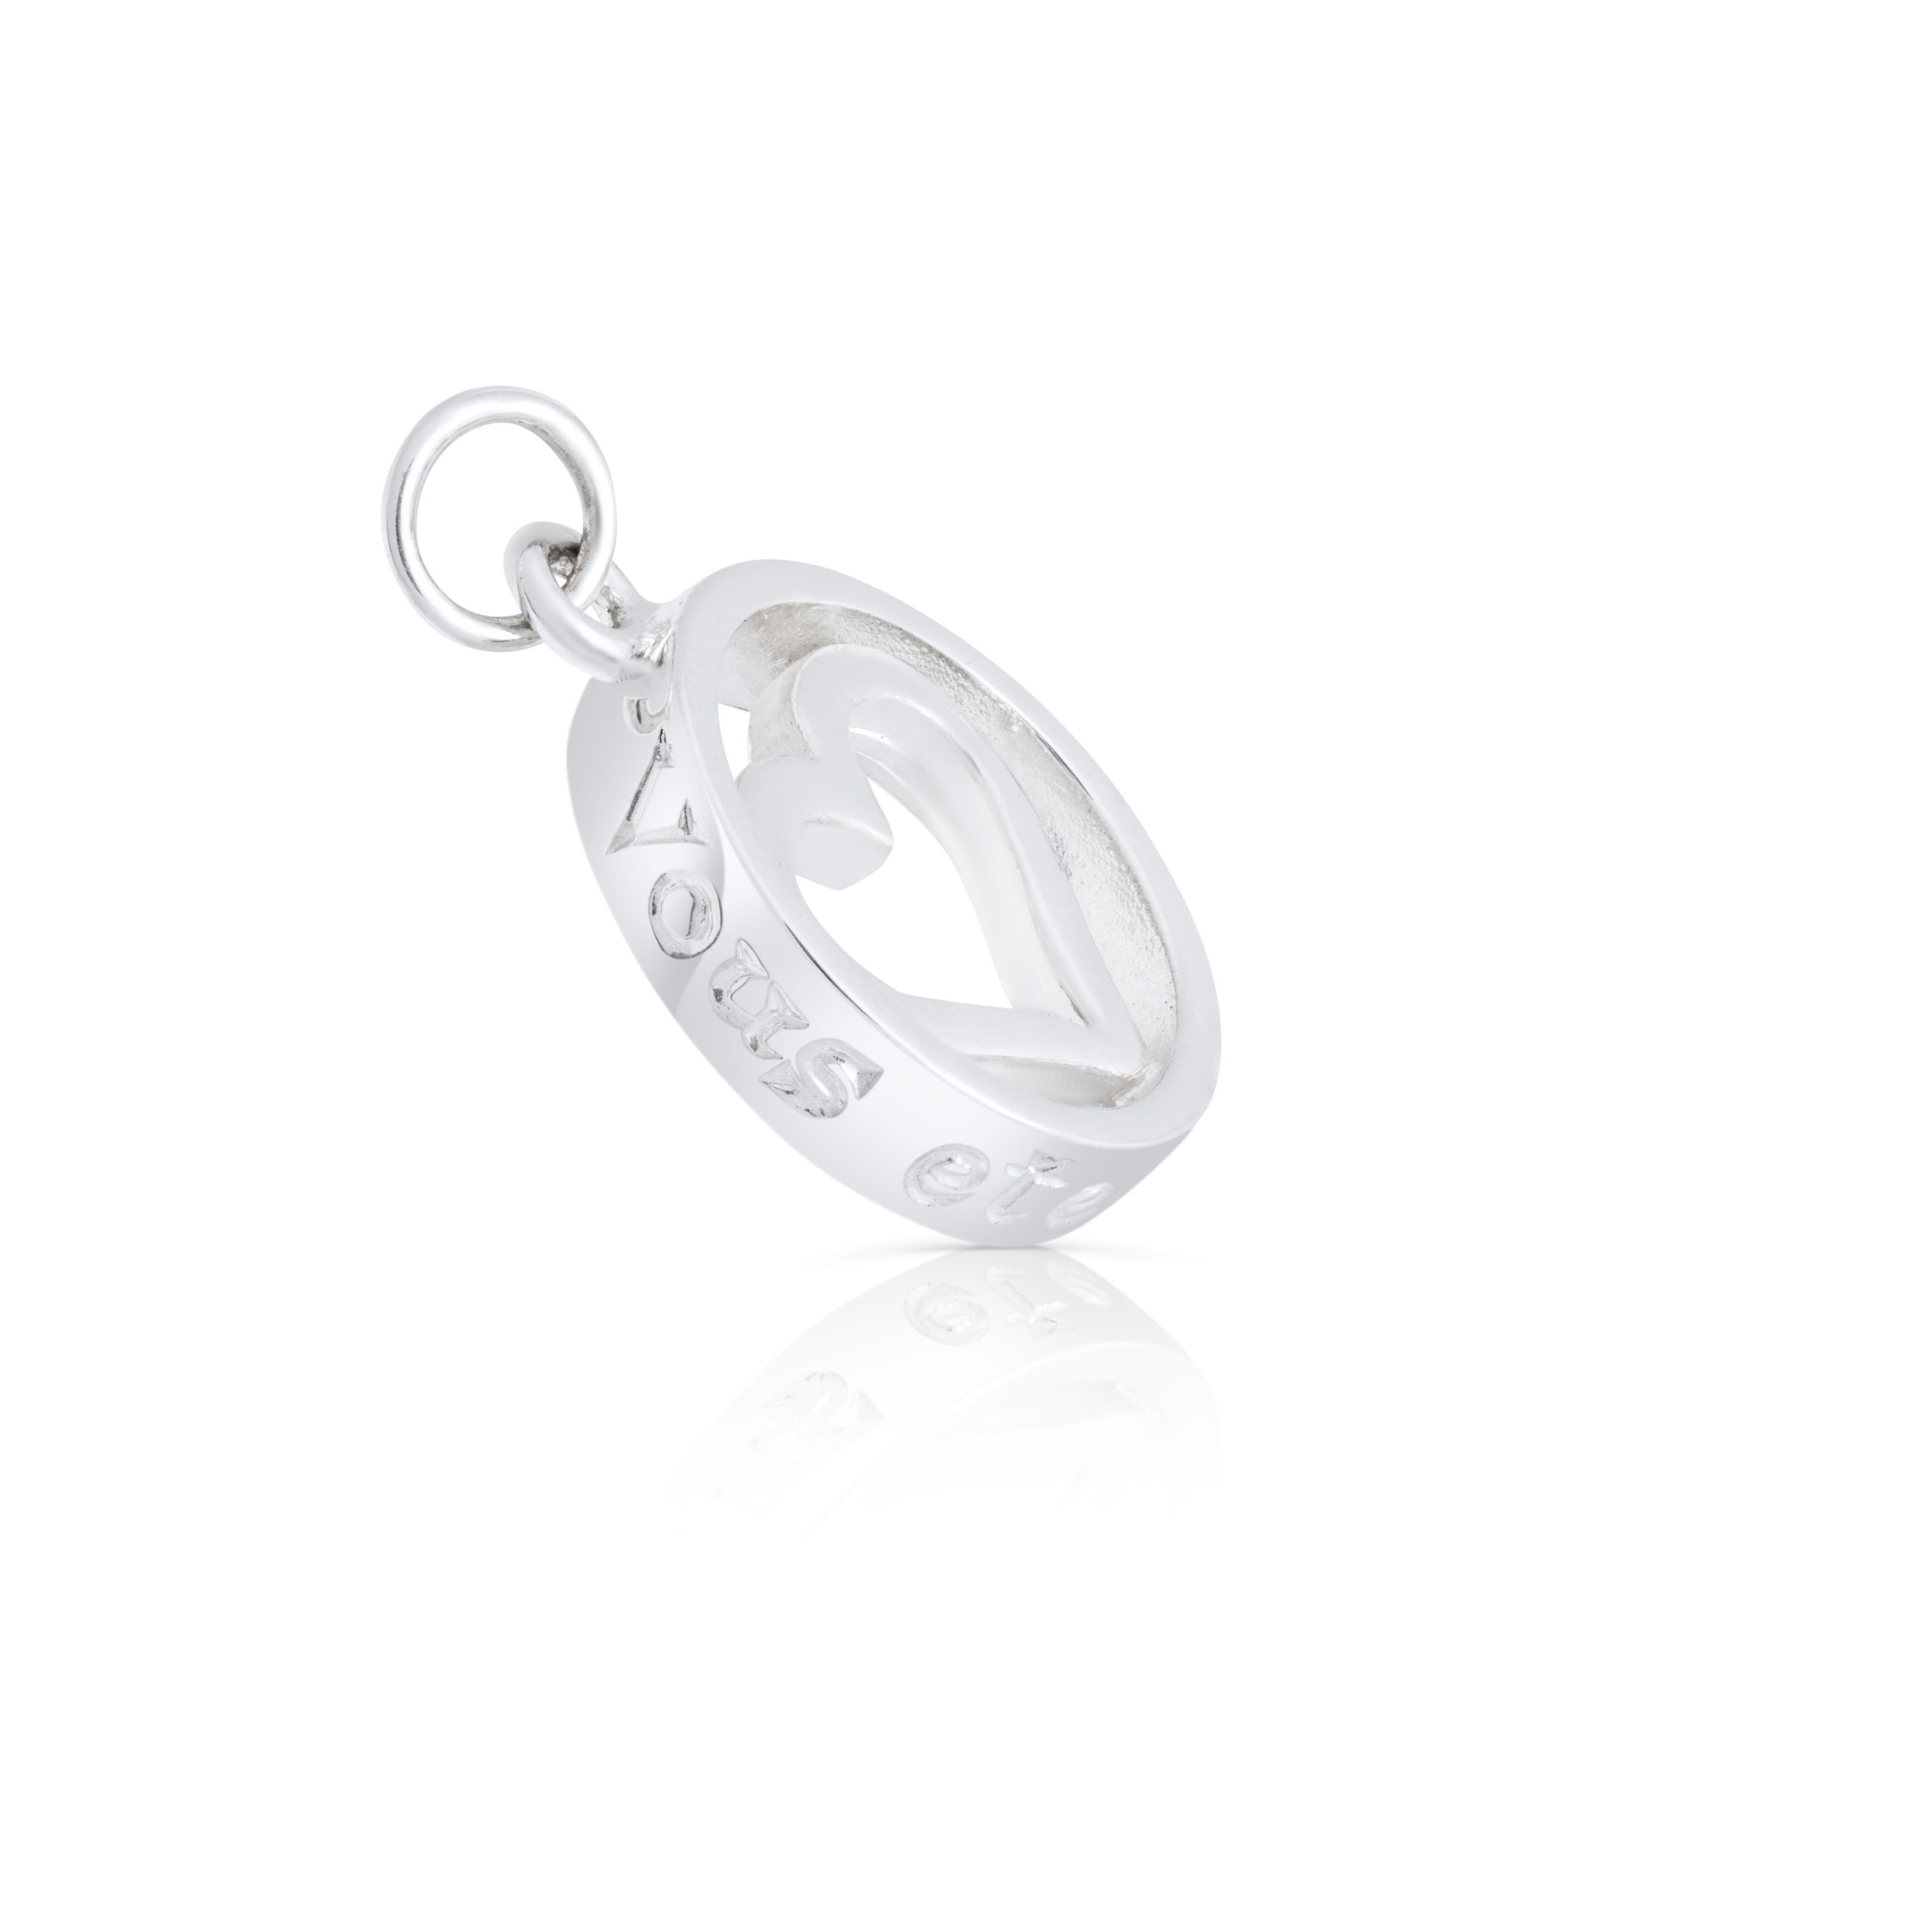 Sterling Silver Heart Charm / Pendant